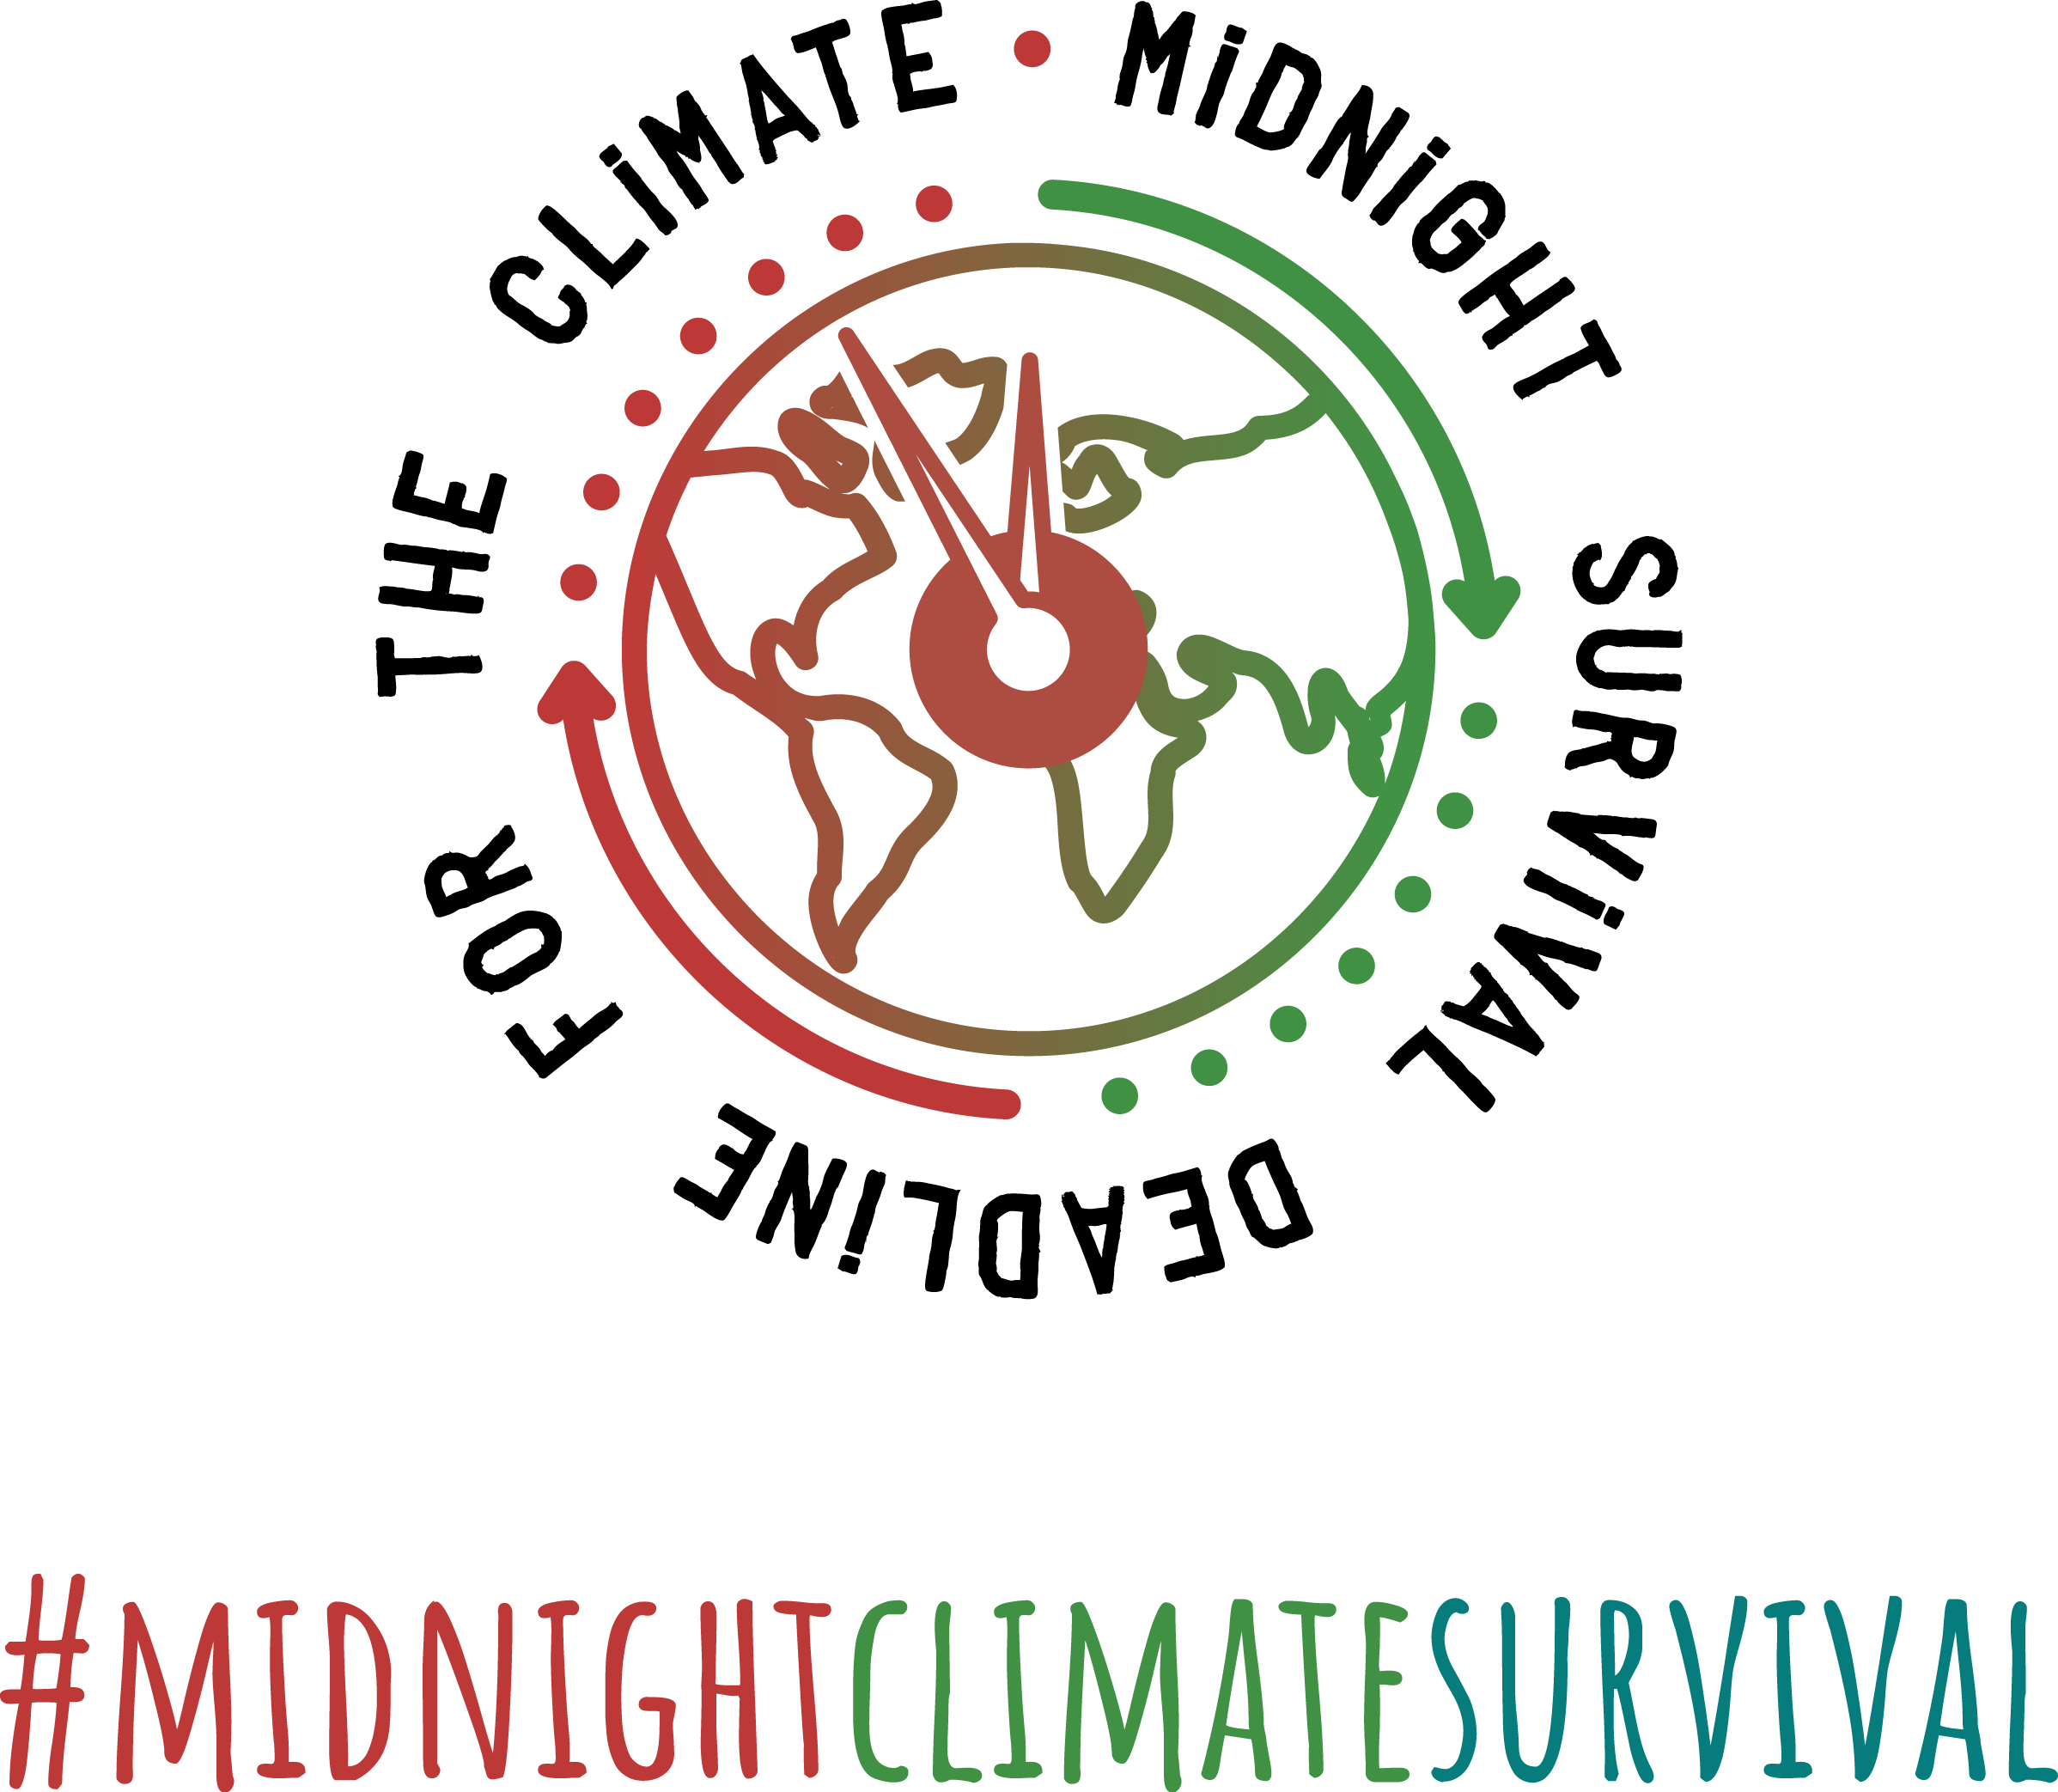 Midnight Climate Survival Thecvf Org